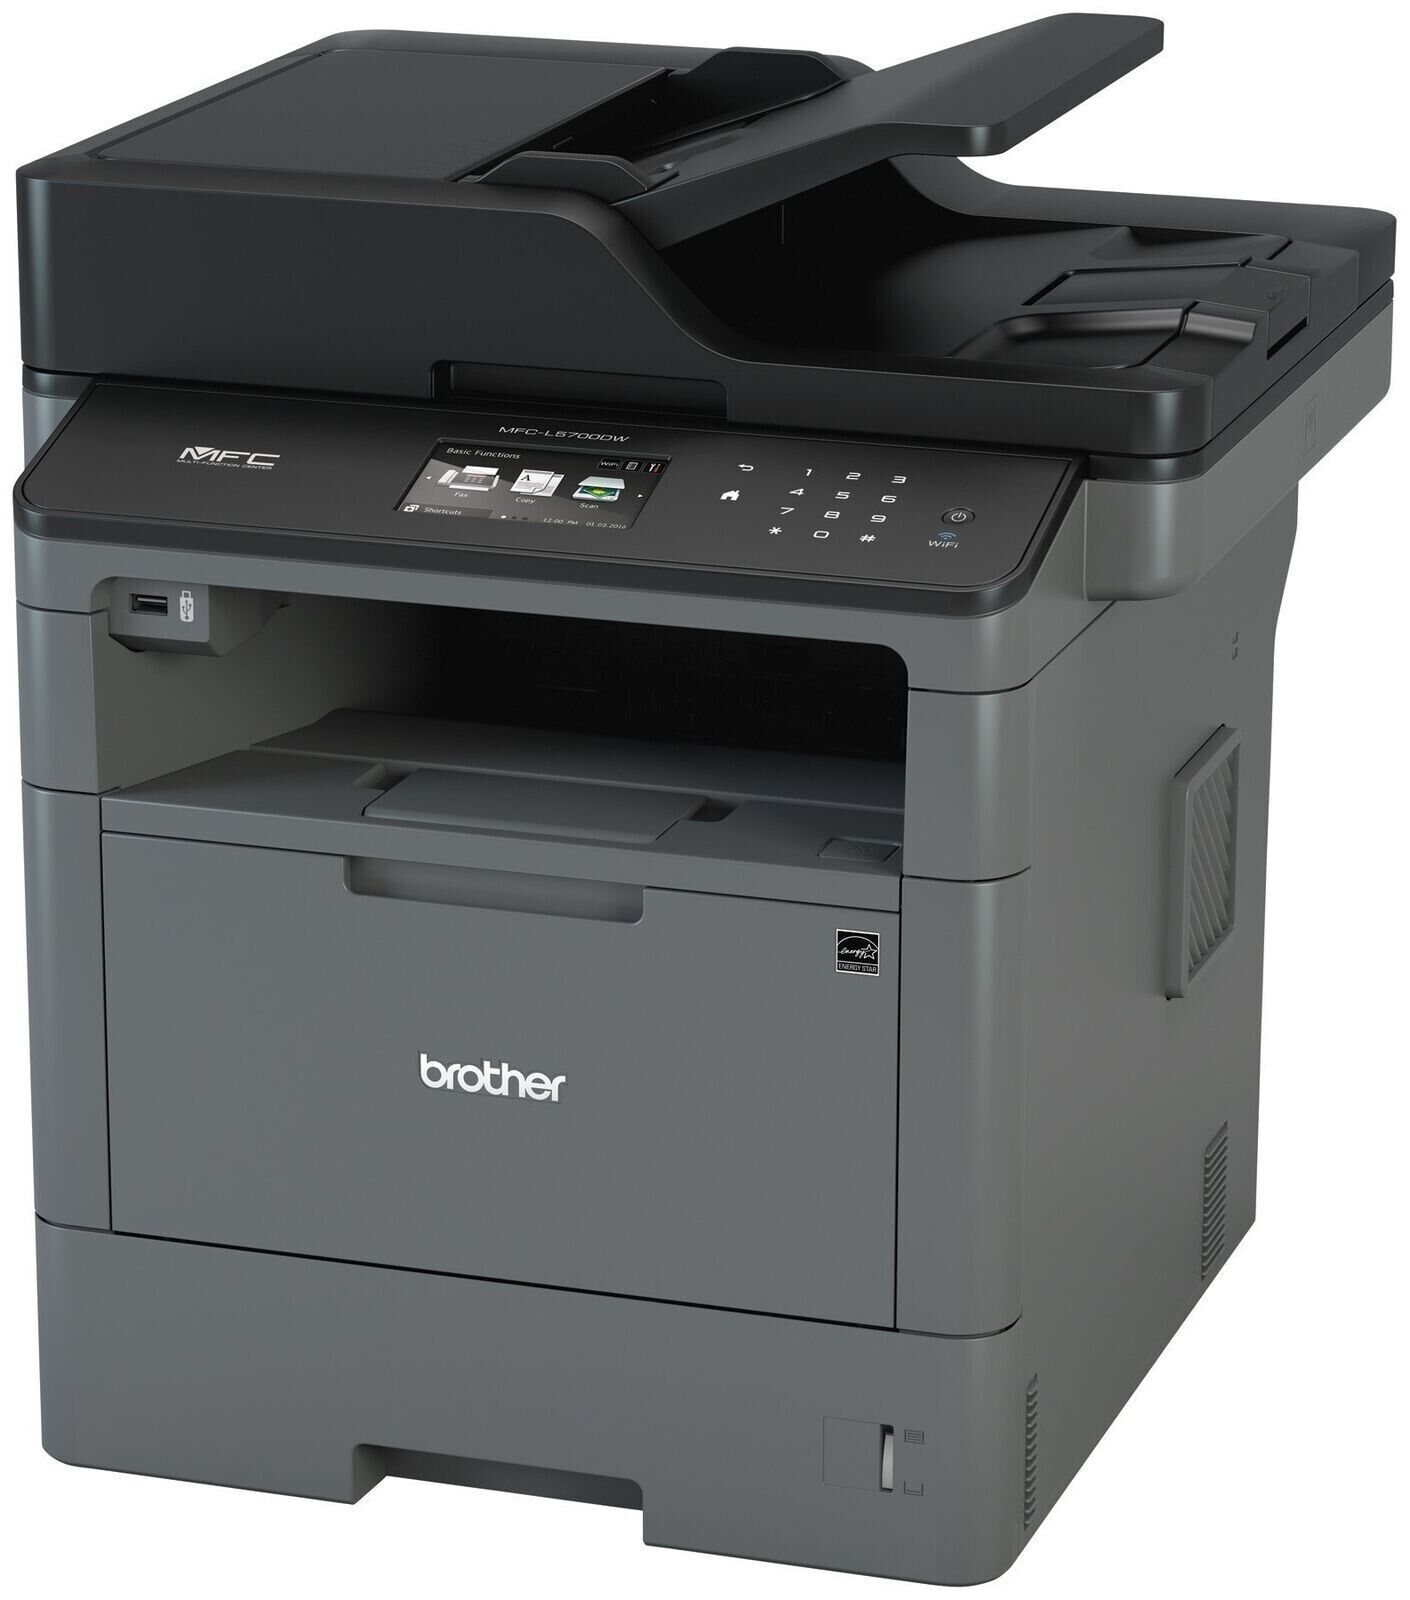 New Brother MFC-L5700DW All-in-One Monochrome Laser Printer